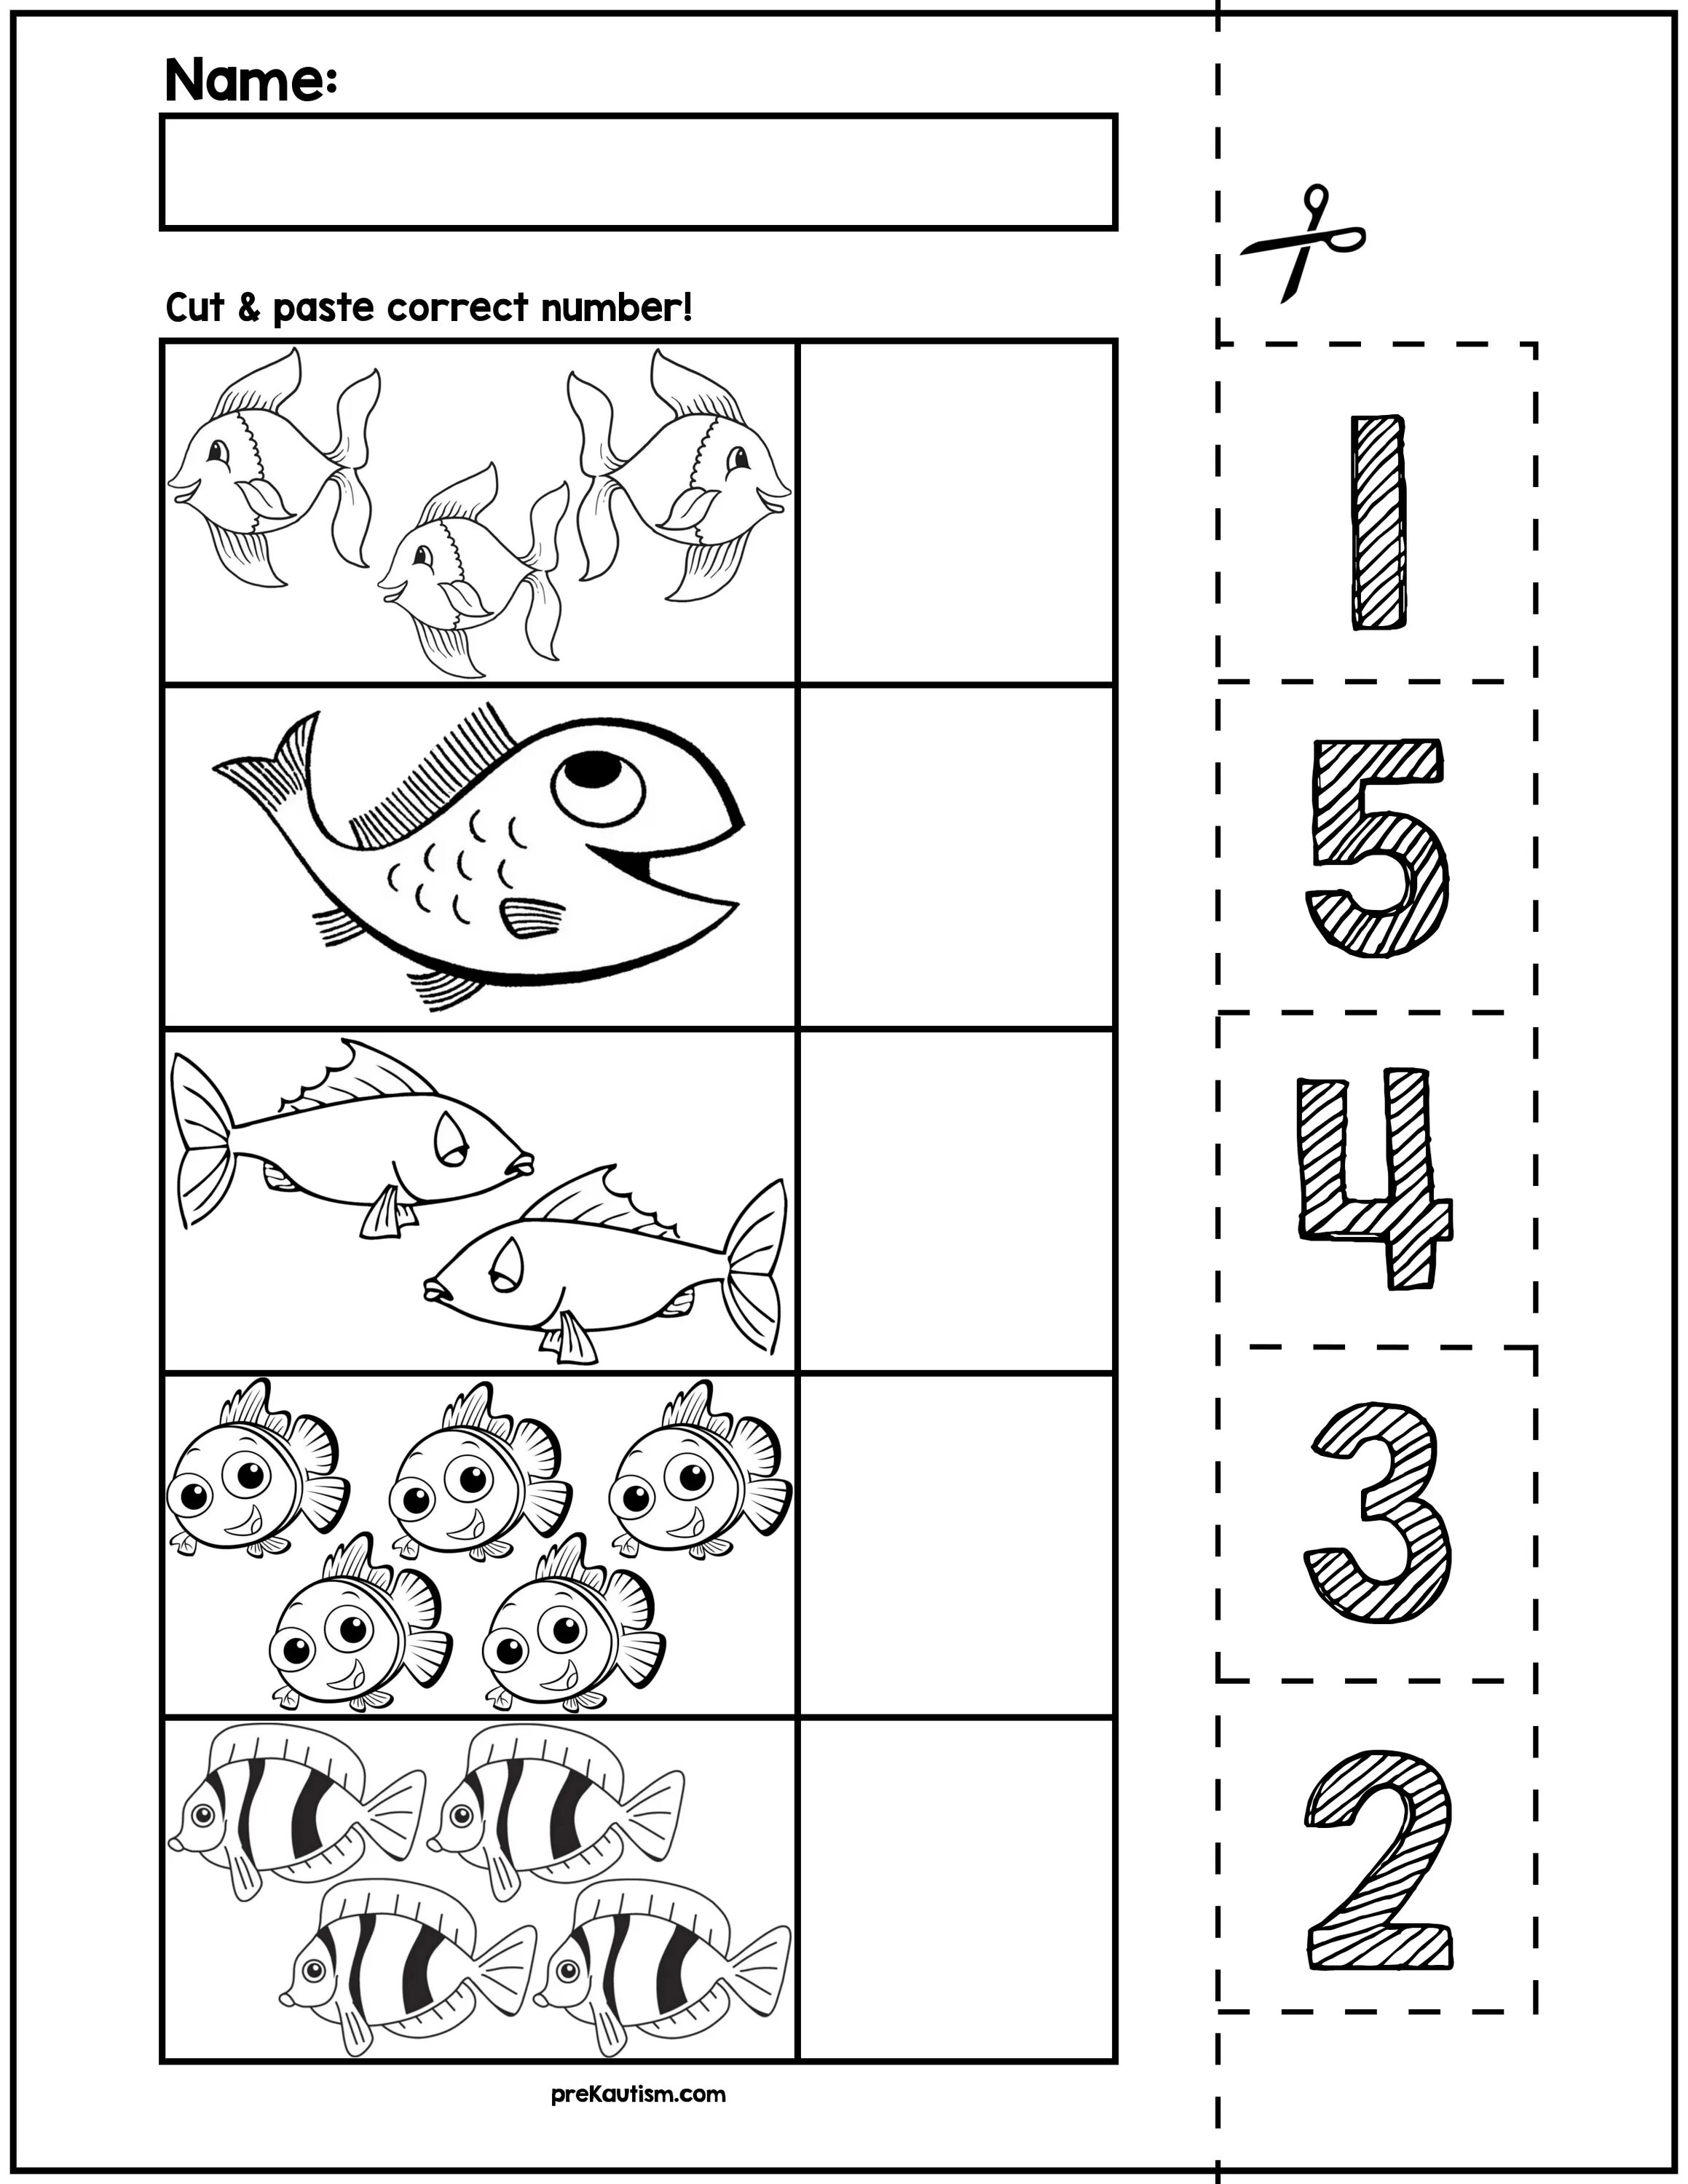 1 5 worksheet. Numbers 1-5 Worksheets. Numbers 1-5 Worksheets for Kids. Worksheets числа 1-5. Numbers 1-5 Trace.